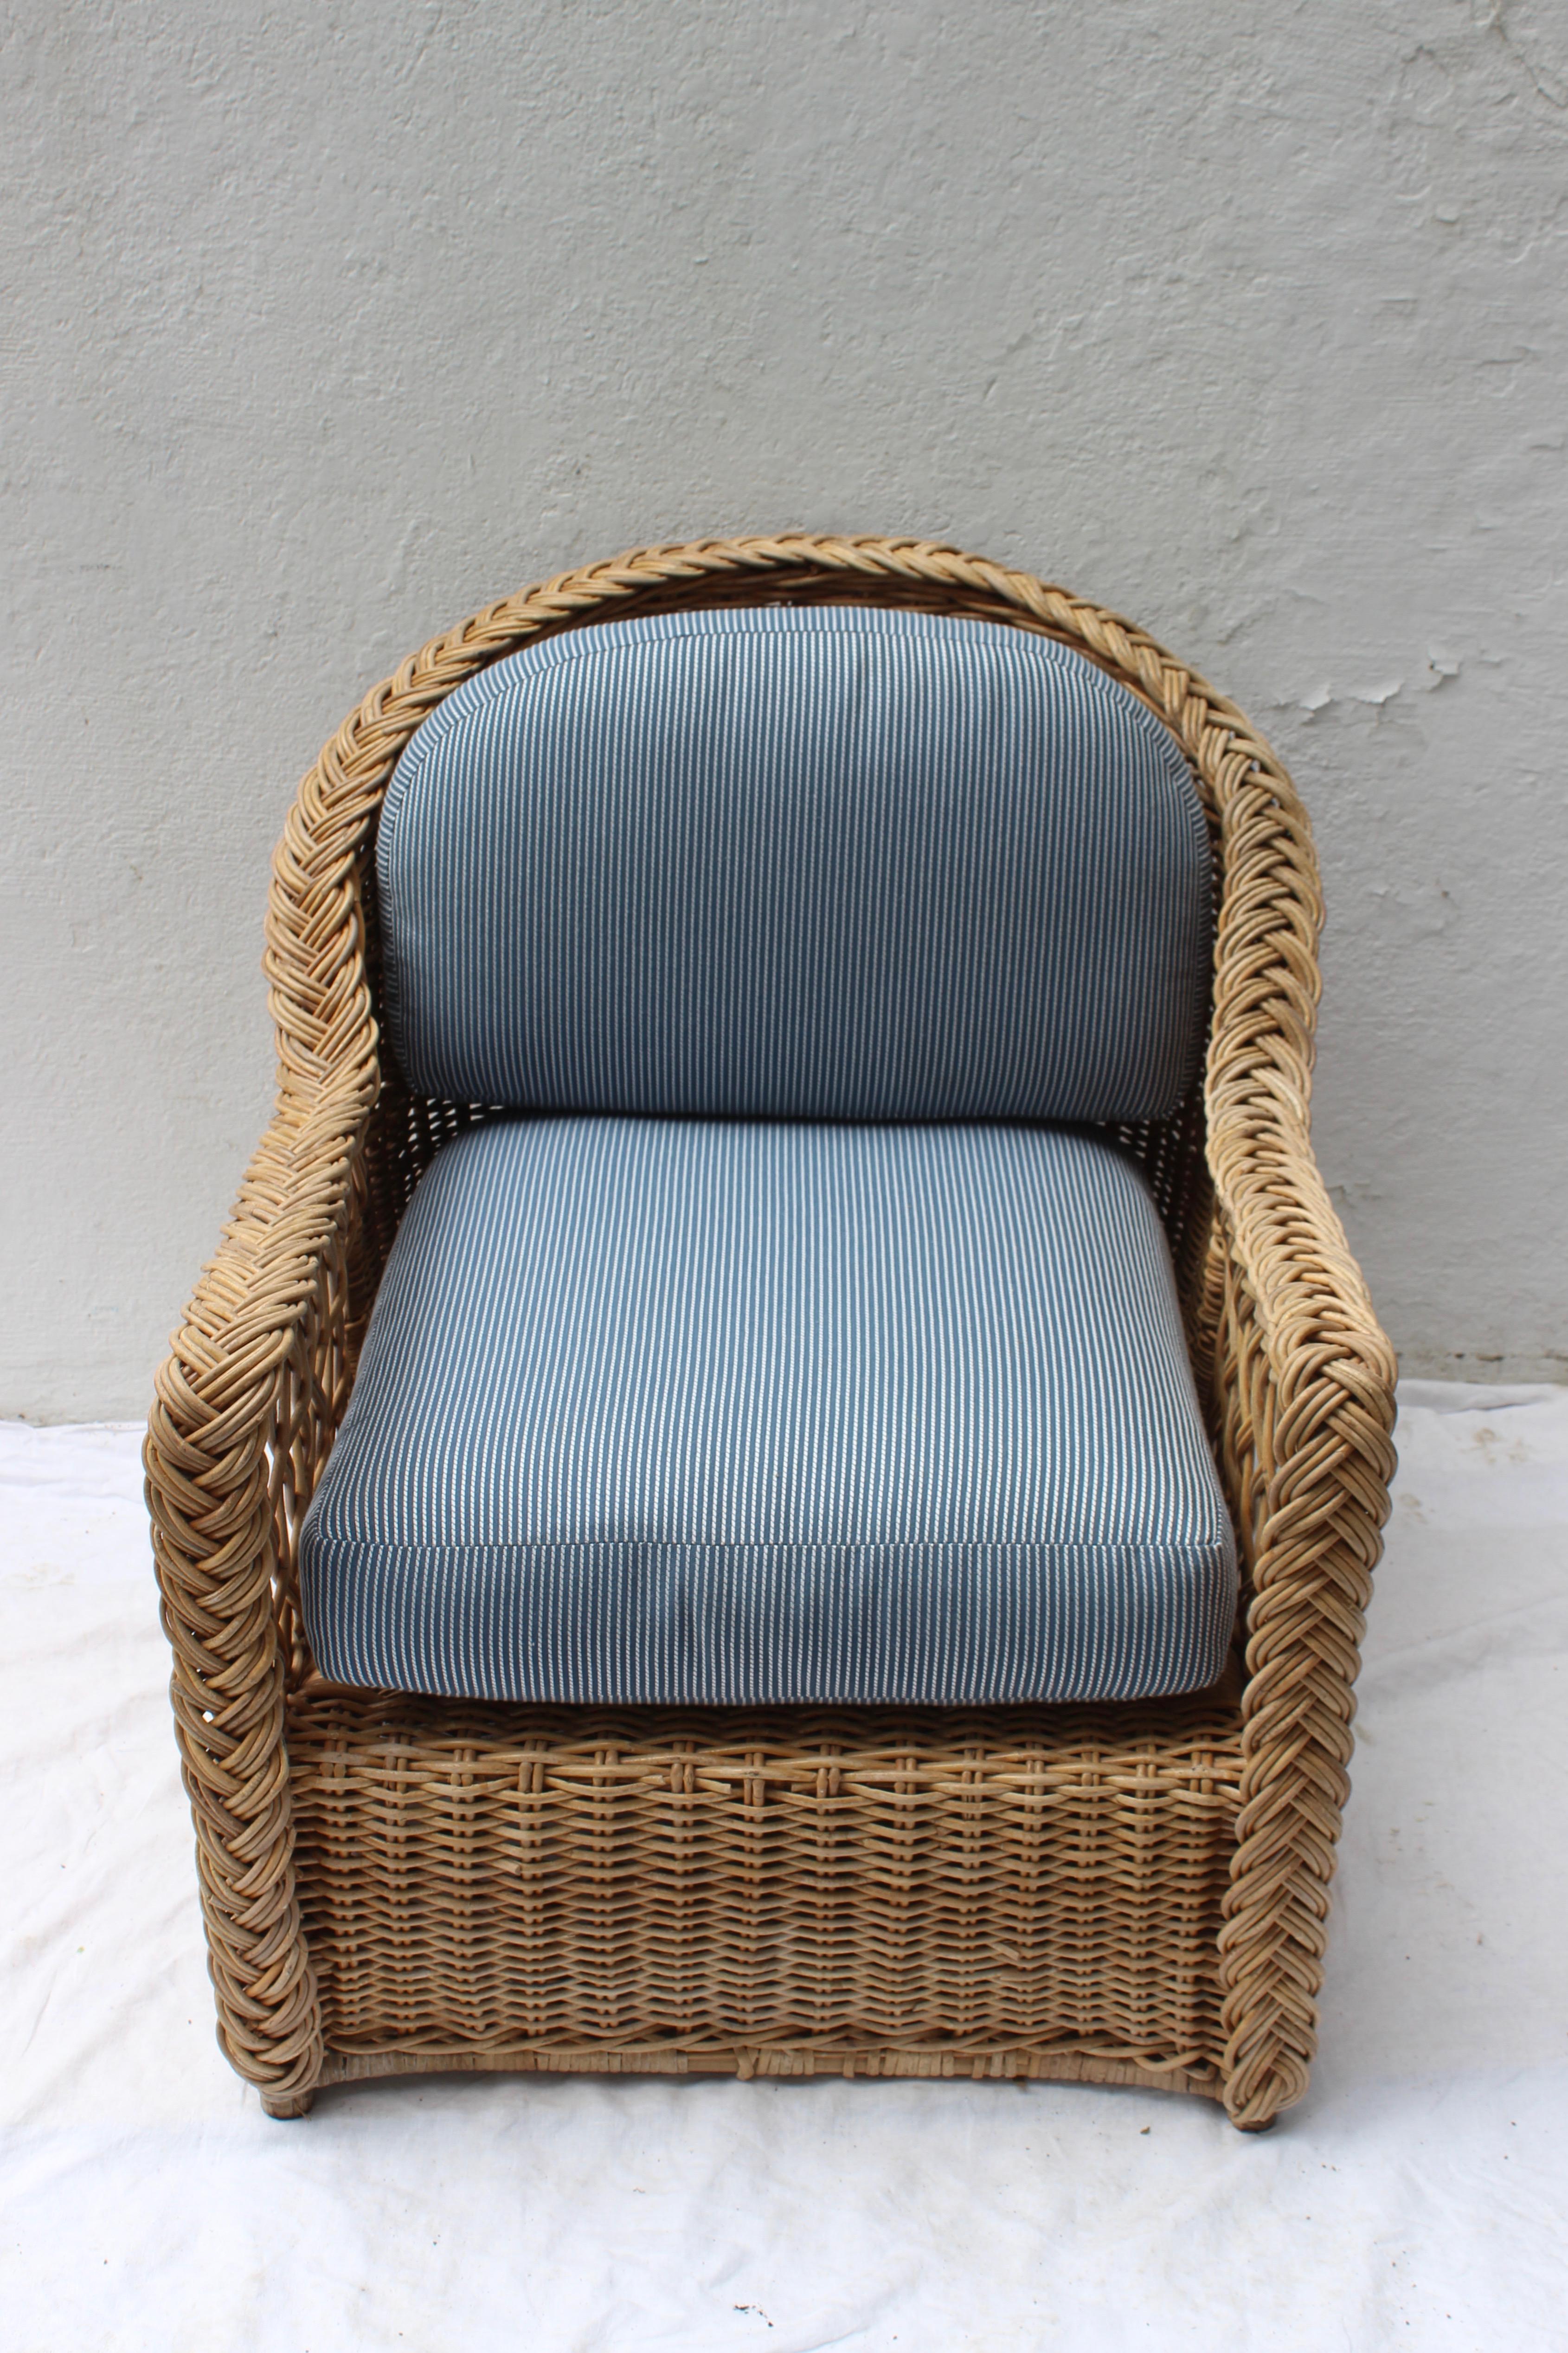 Vintage armchair with newly upholstered in blue fabric cushions.